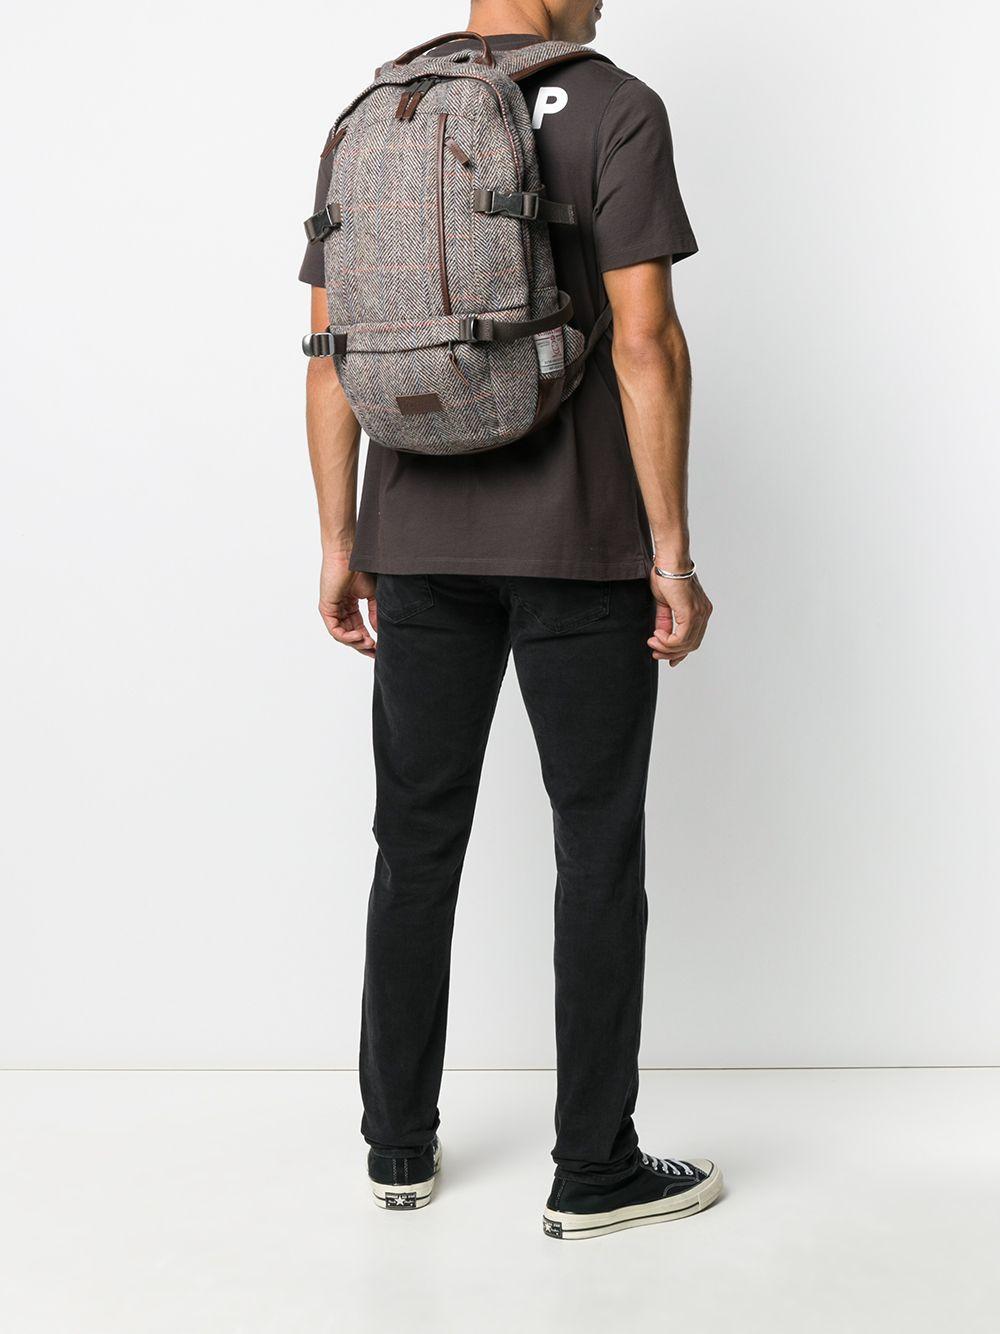 Eastpak Leather X Harris Tweed Floid Backpack in Grey (Gray) for Men - Lyst